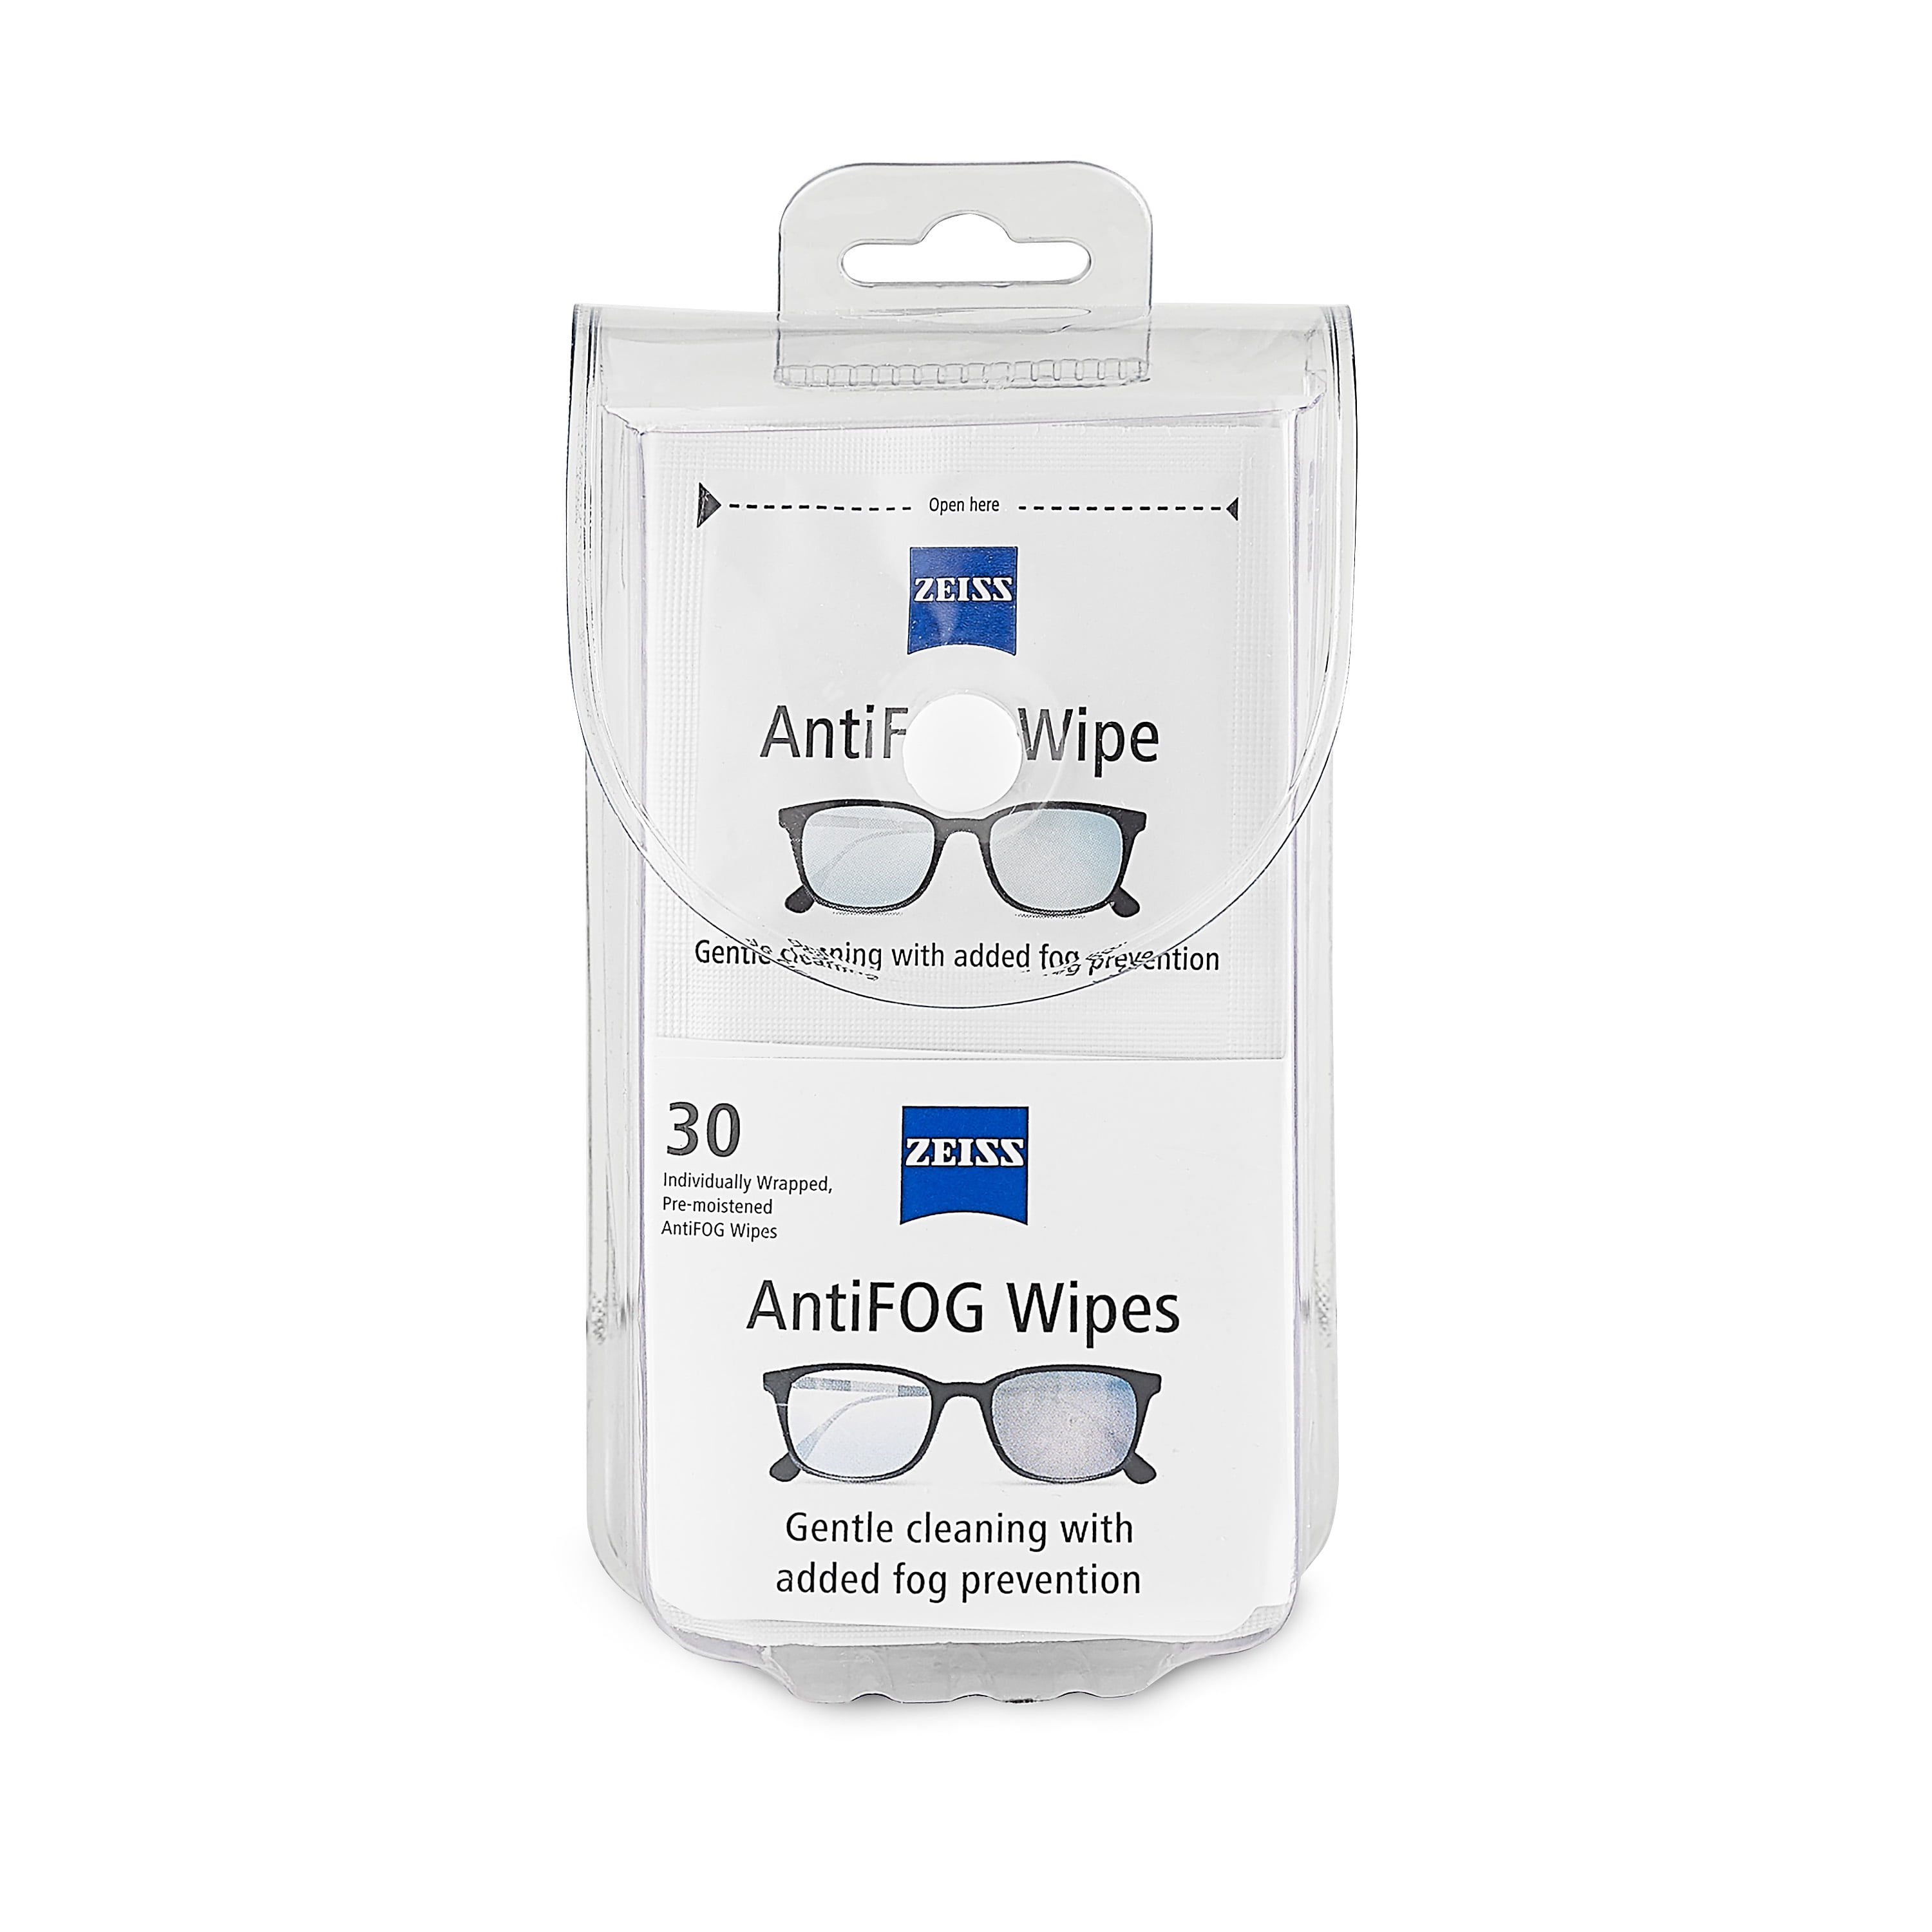 ZEISS Anti-Fog Lens Wipes, Pre-Moistened Eye Glass Cleaner Wipes, 30 Count